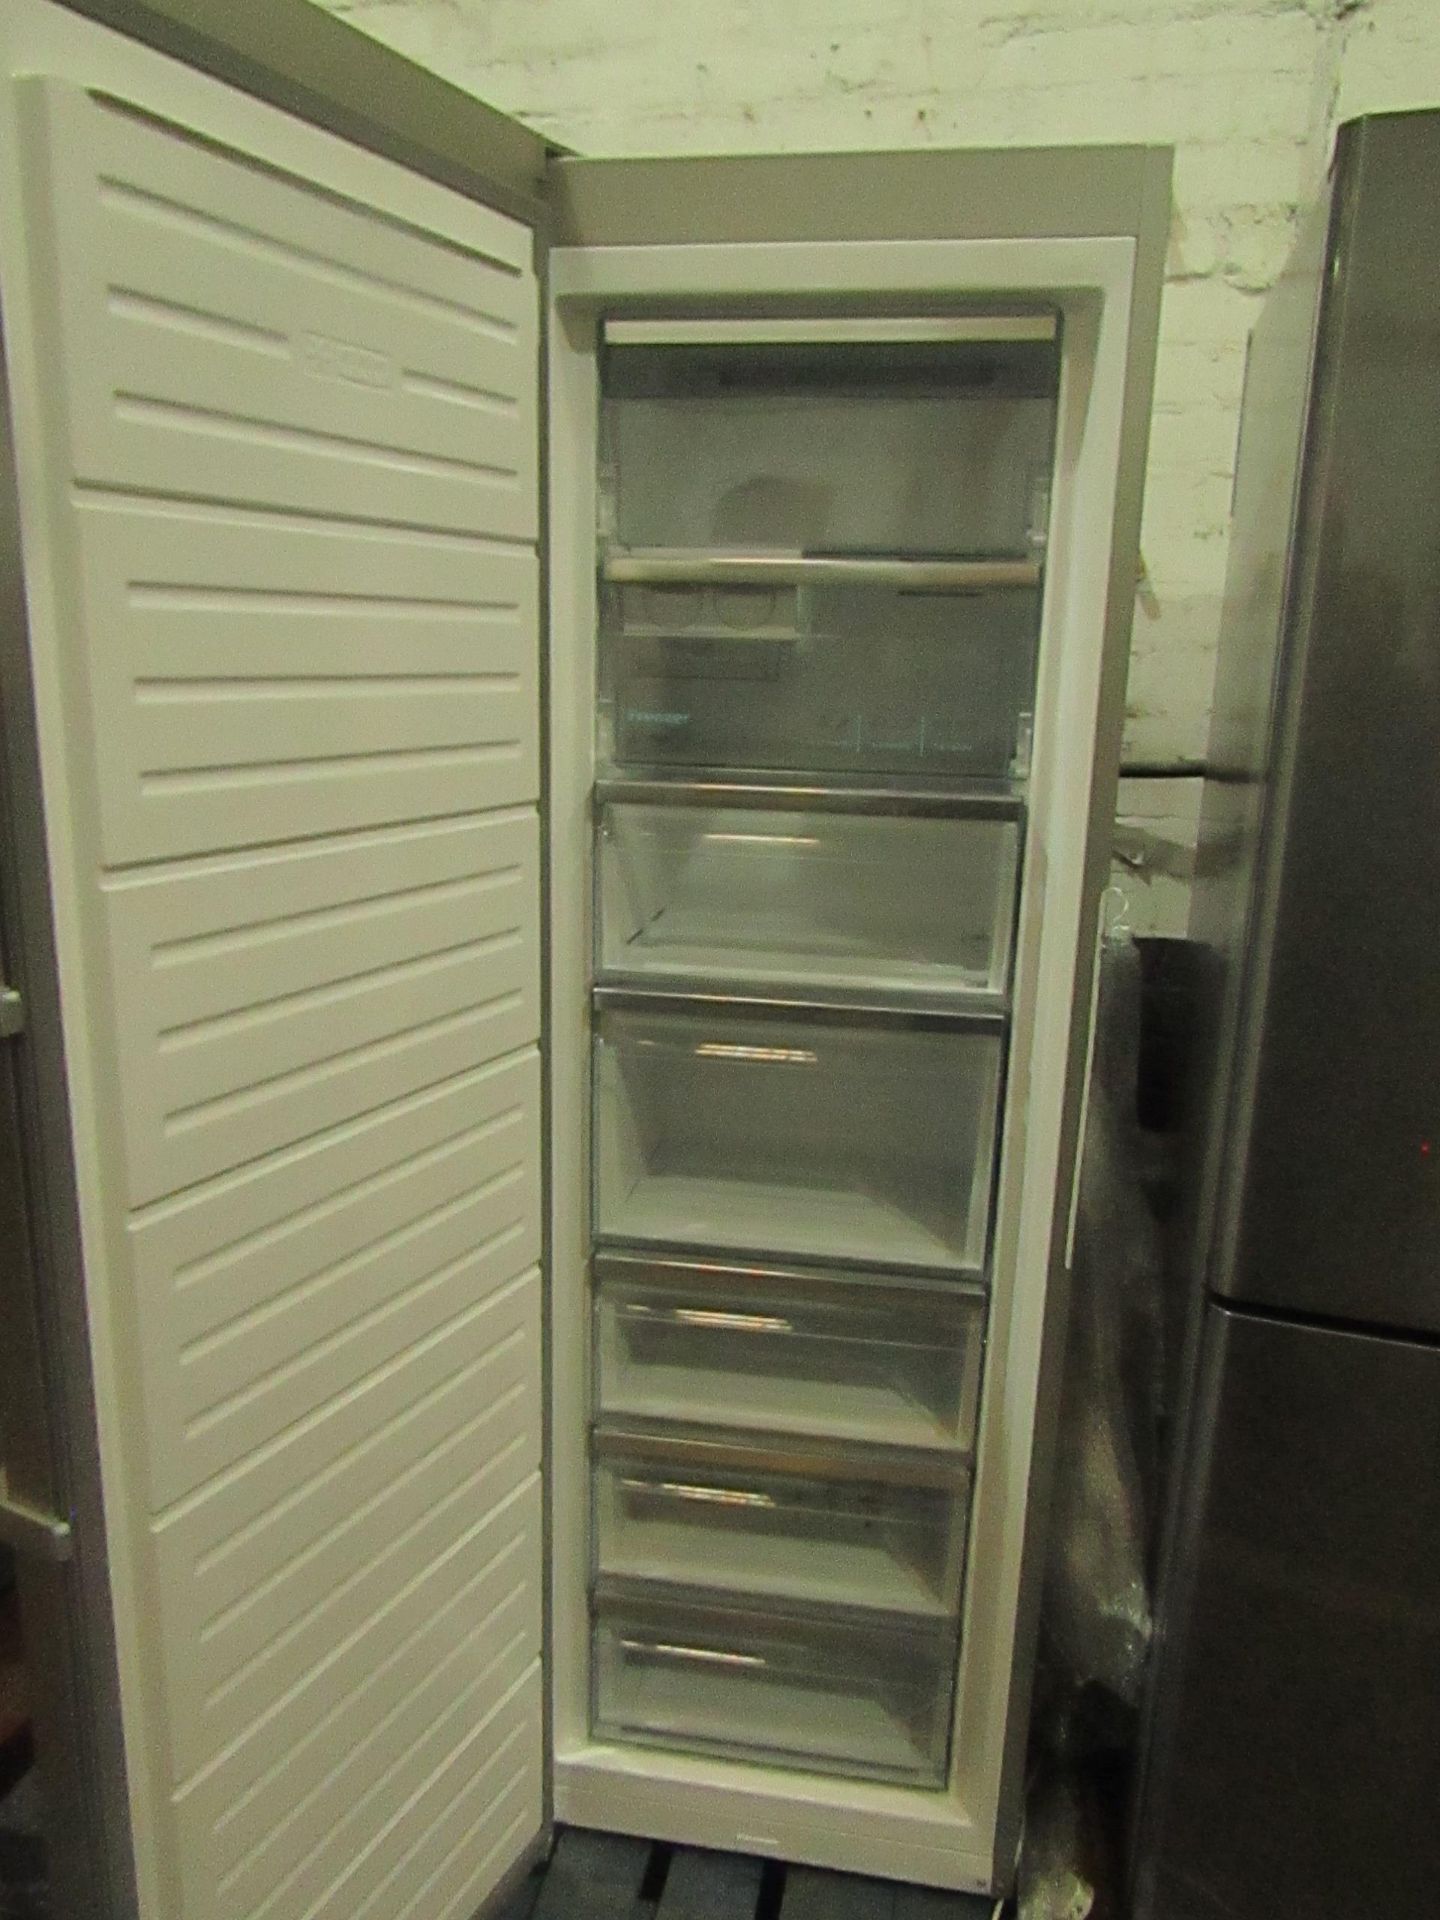 Sharp tall freestanding freezer, powers on but doesn't get cold - Image 2 of 2